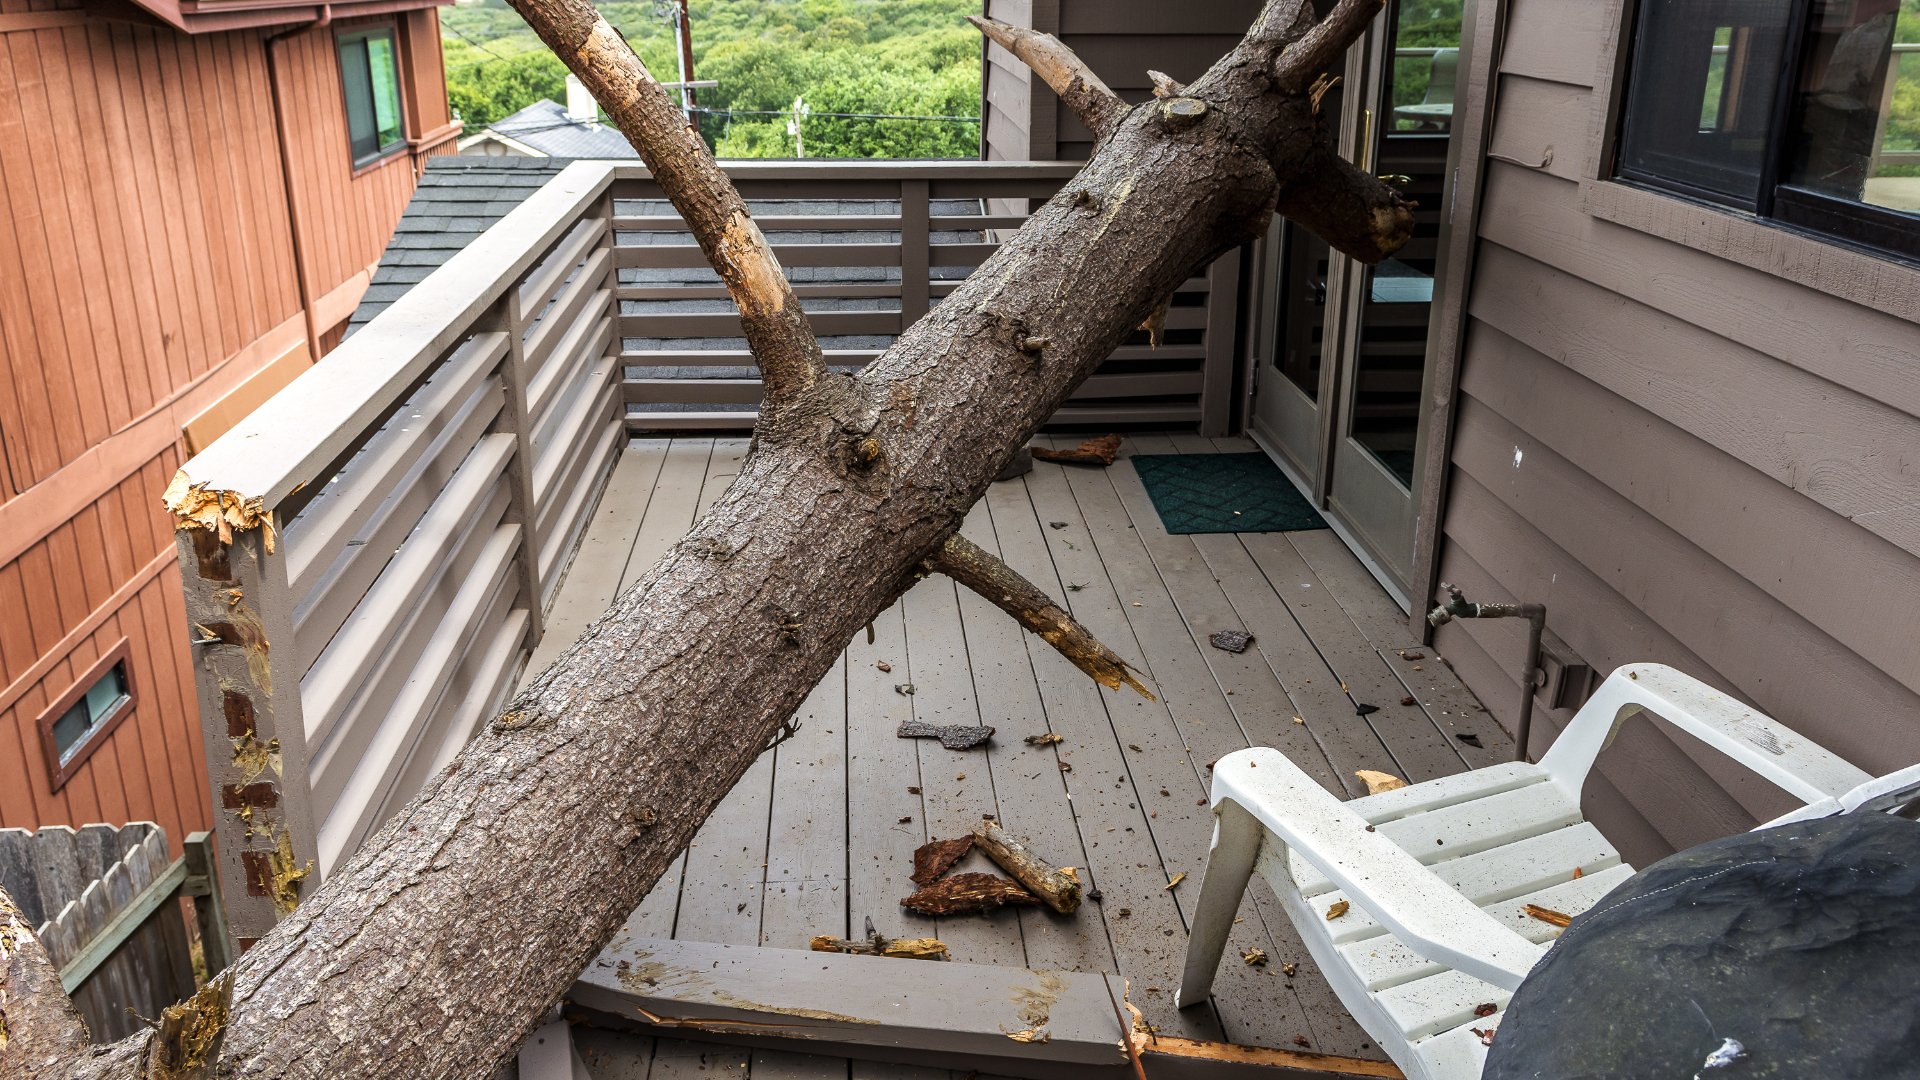 Immediate Steps to Take if a Tree Falls on Your House